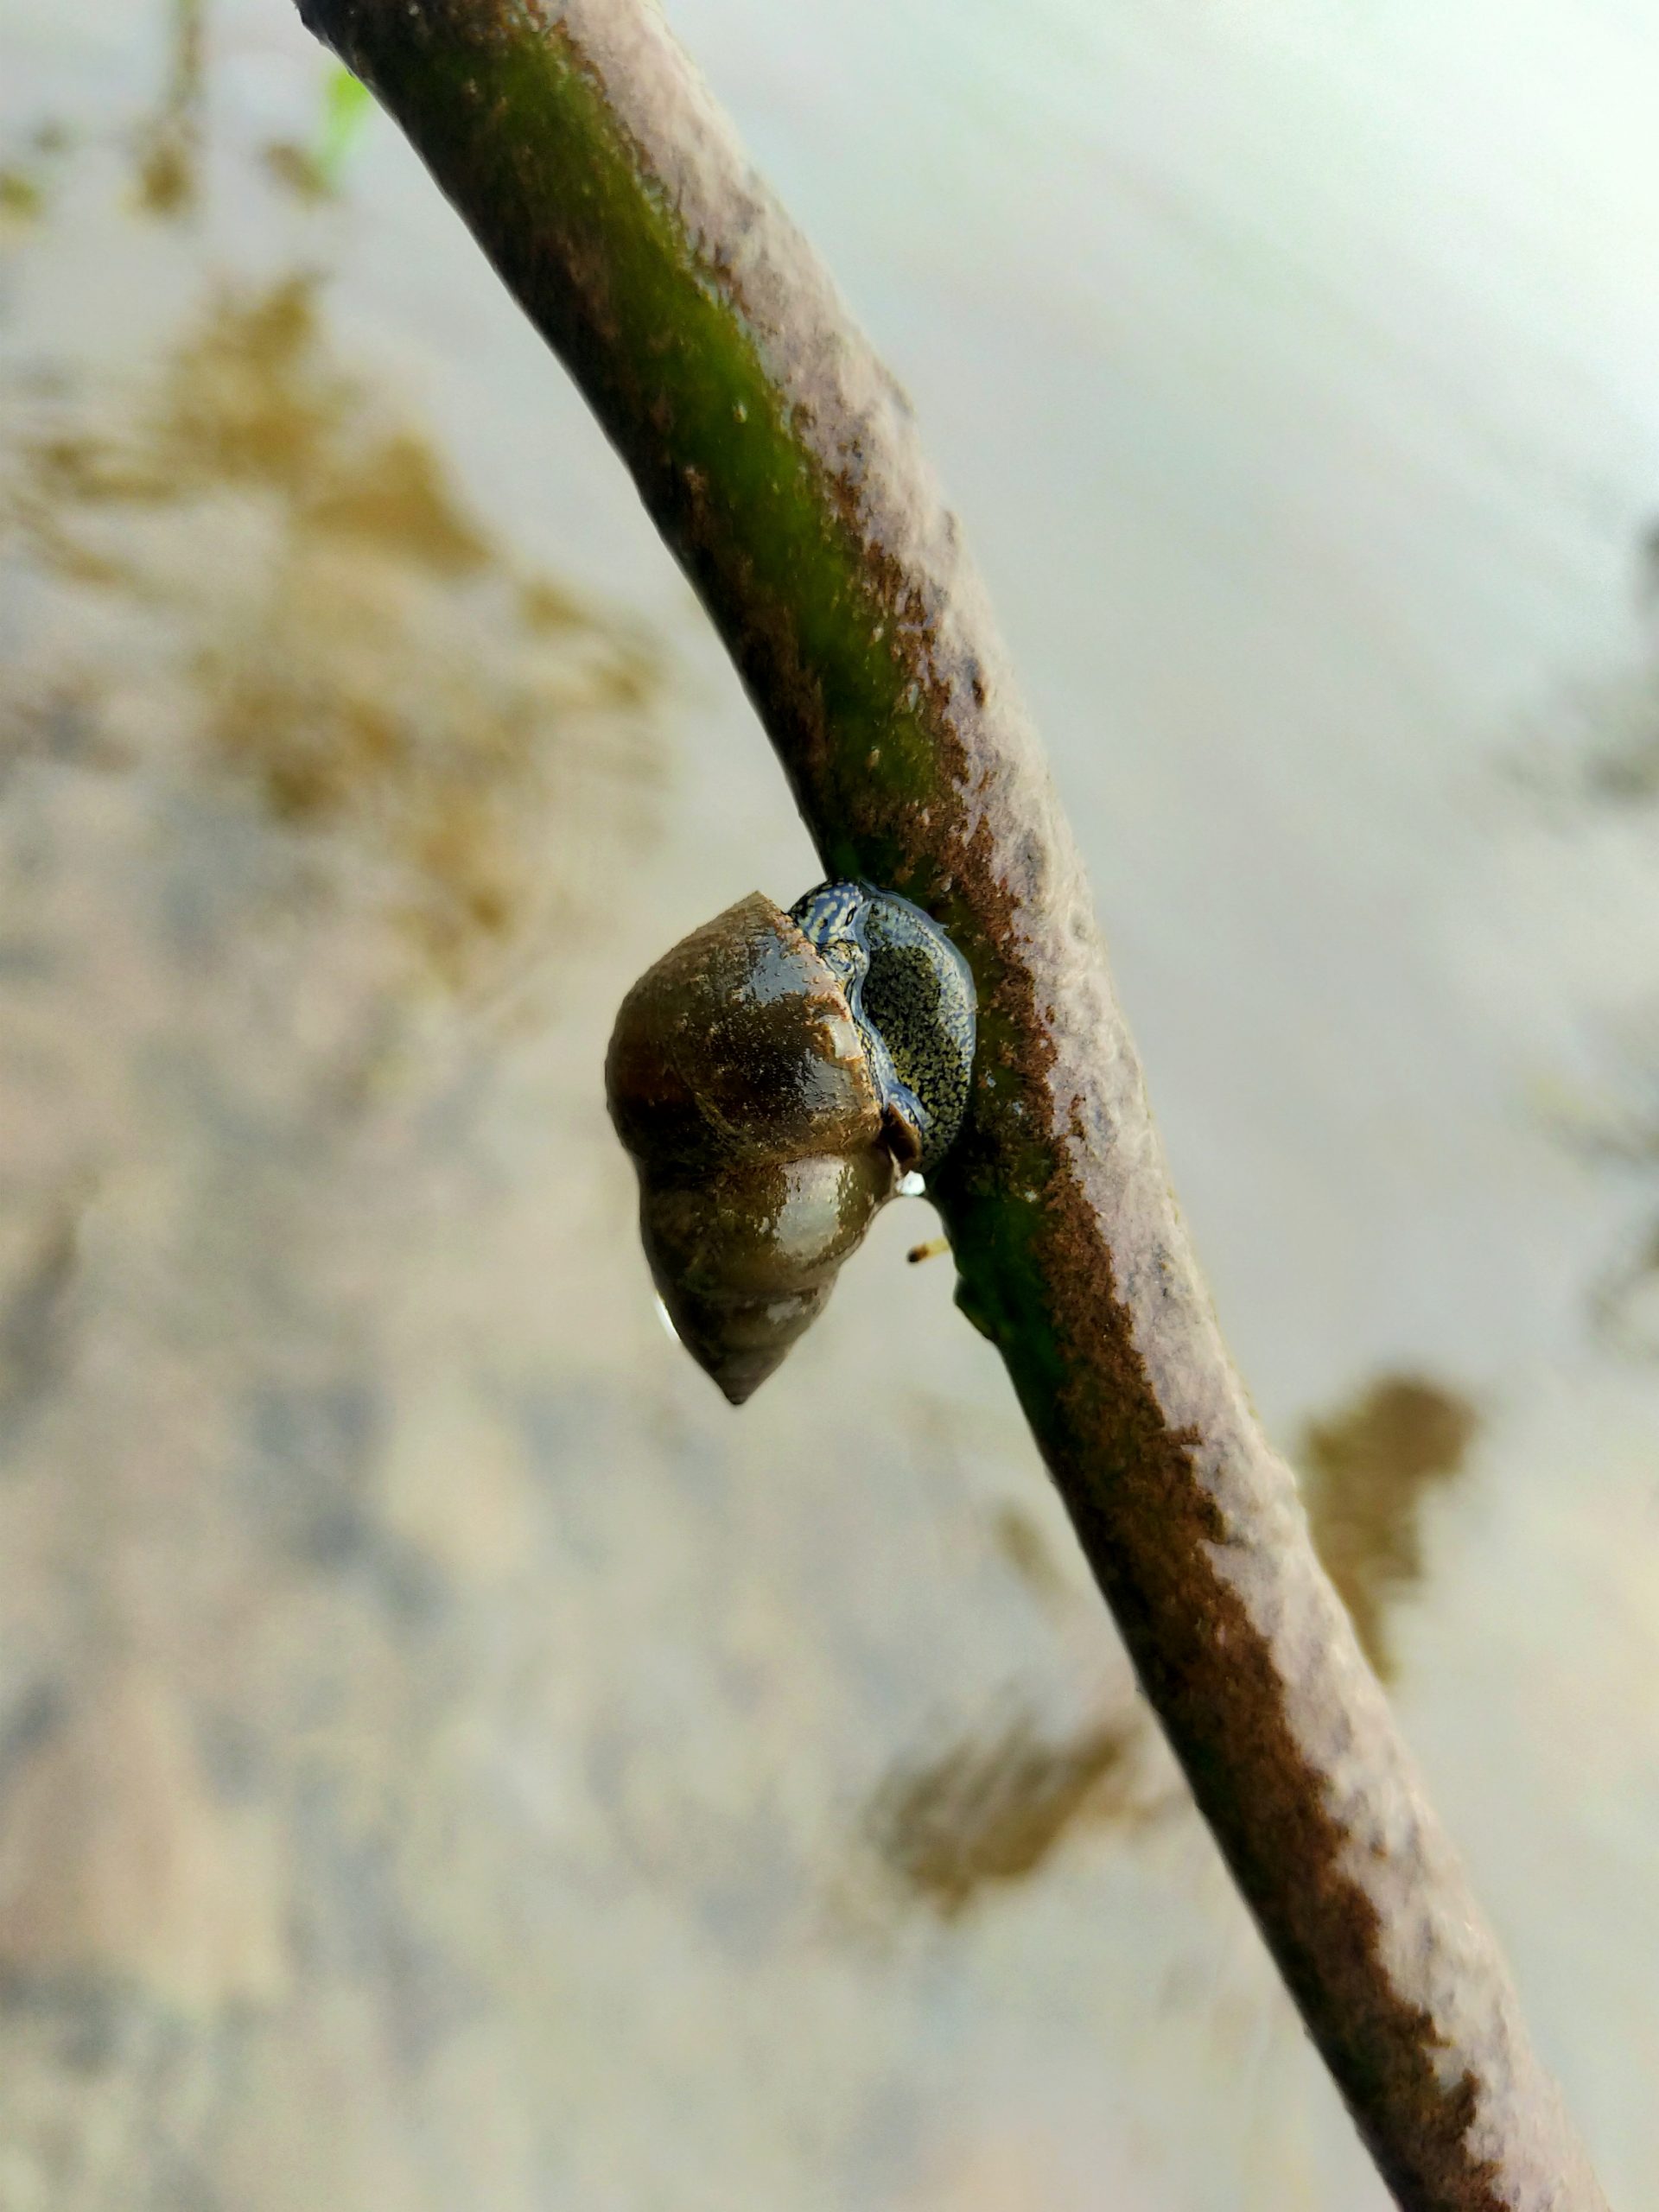 A shell on branch